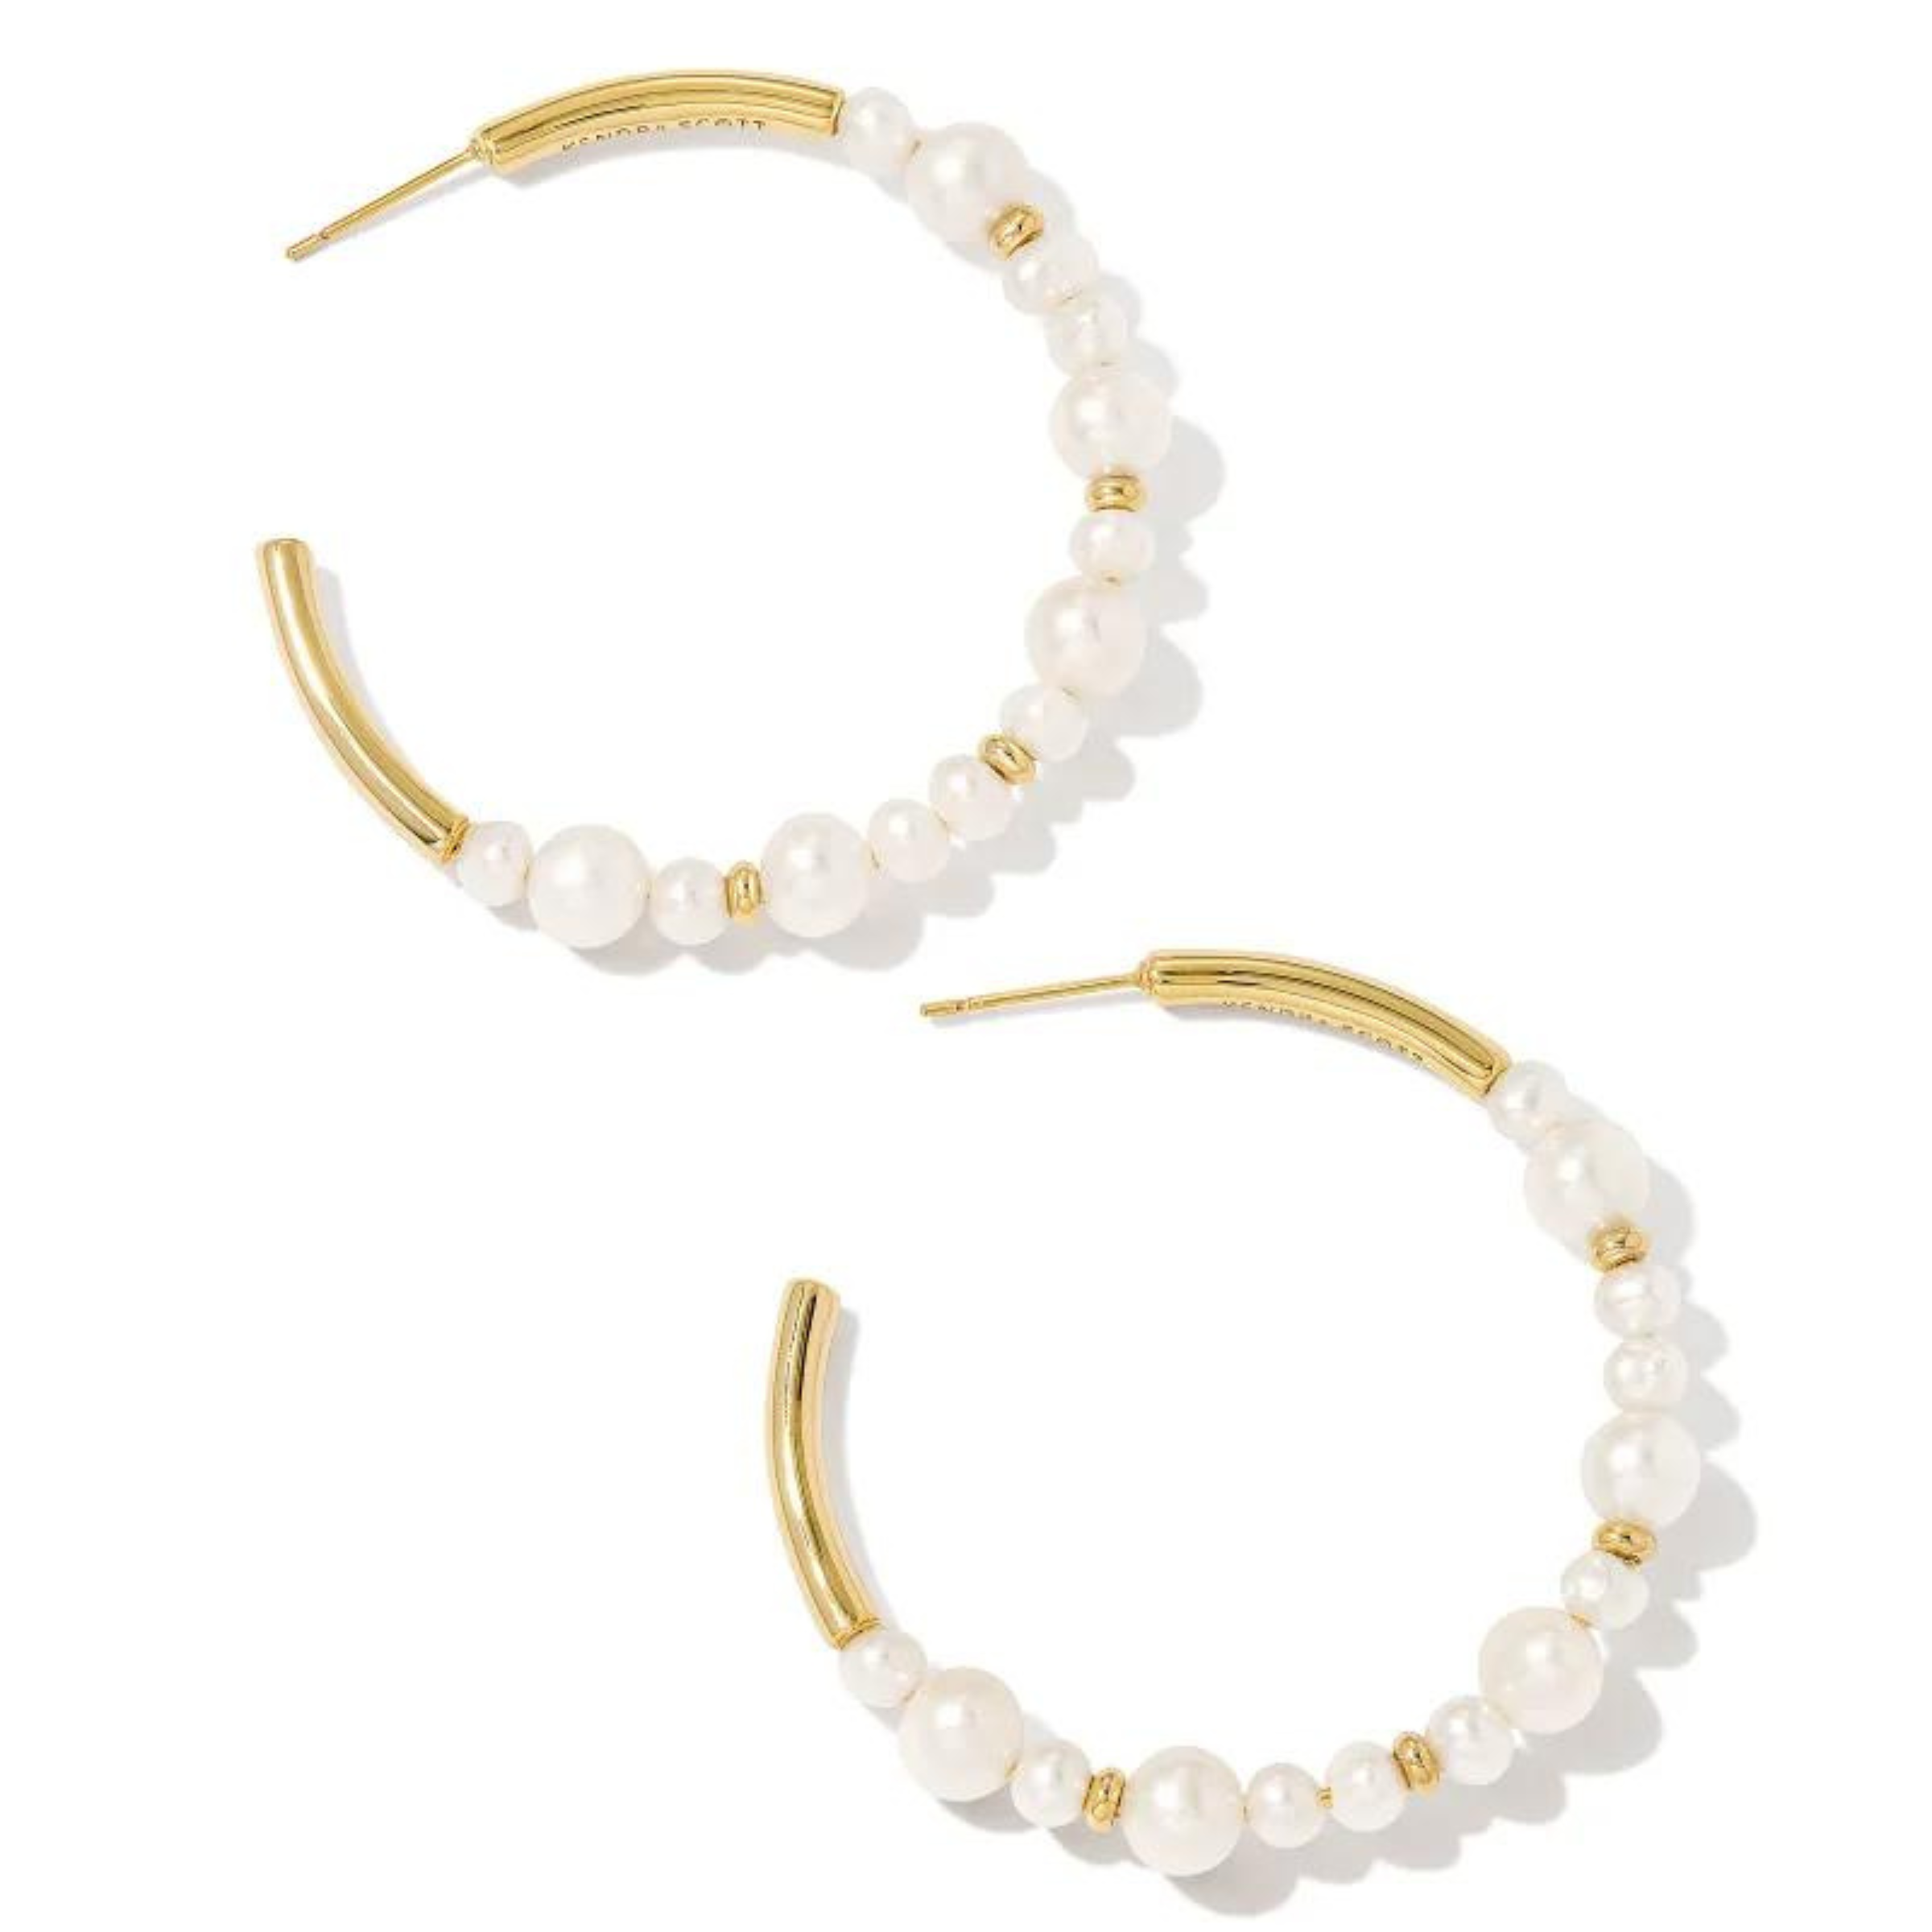 Gold hoop earrings with white pearl beads in varying sizes. These earrings are pictured on a white background. 